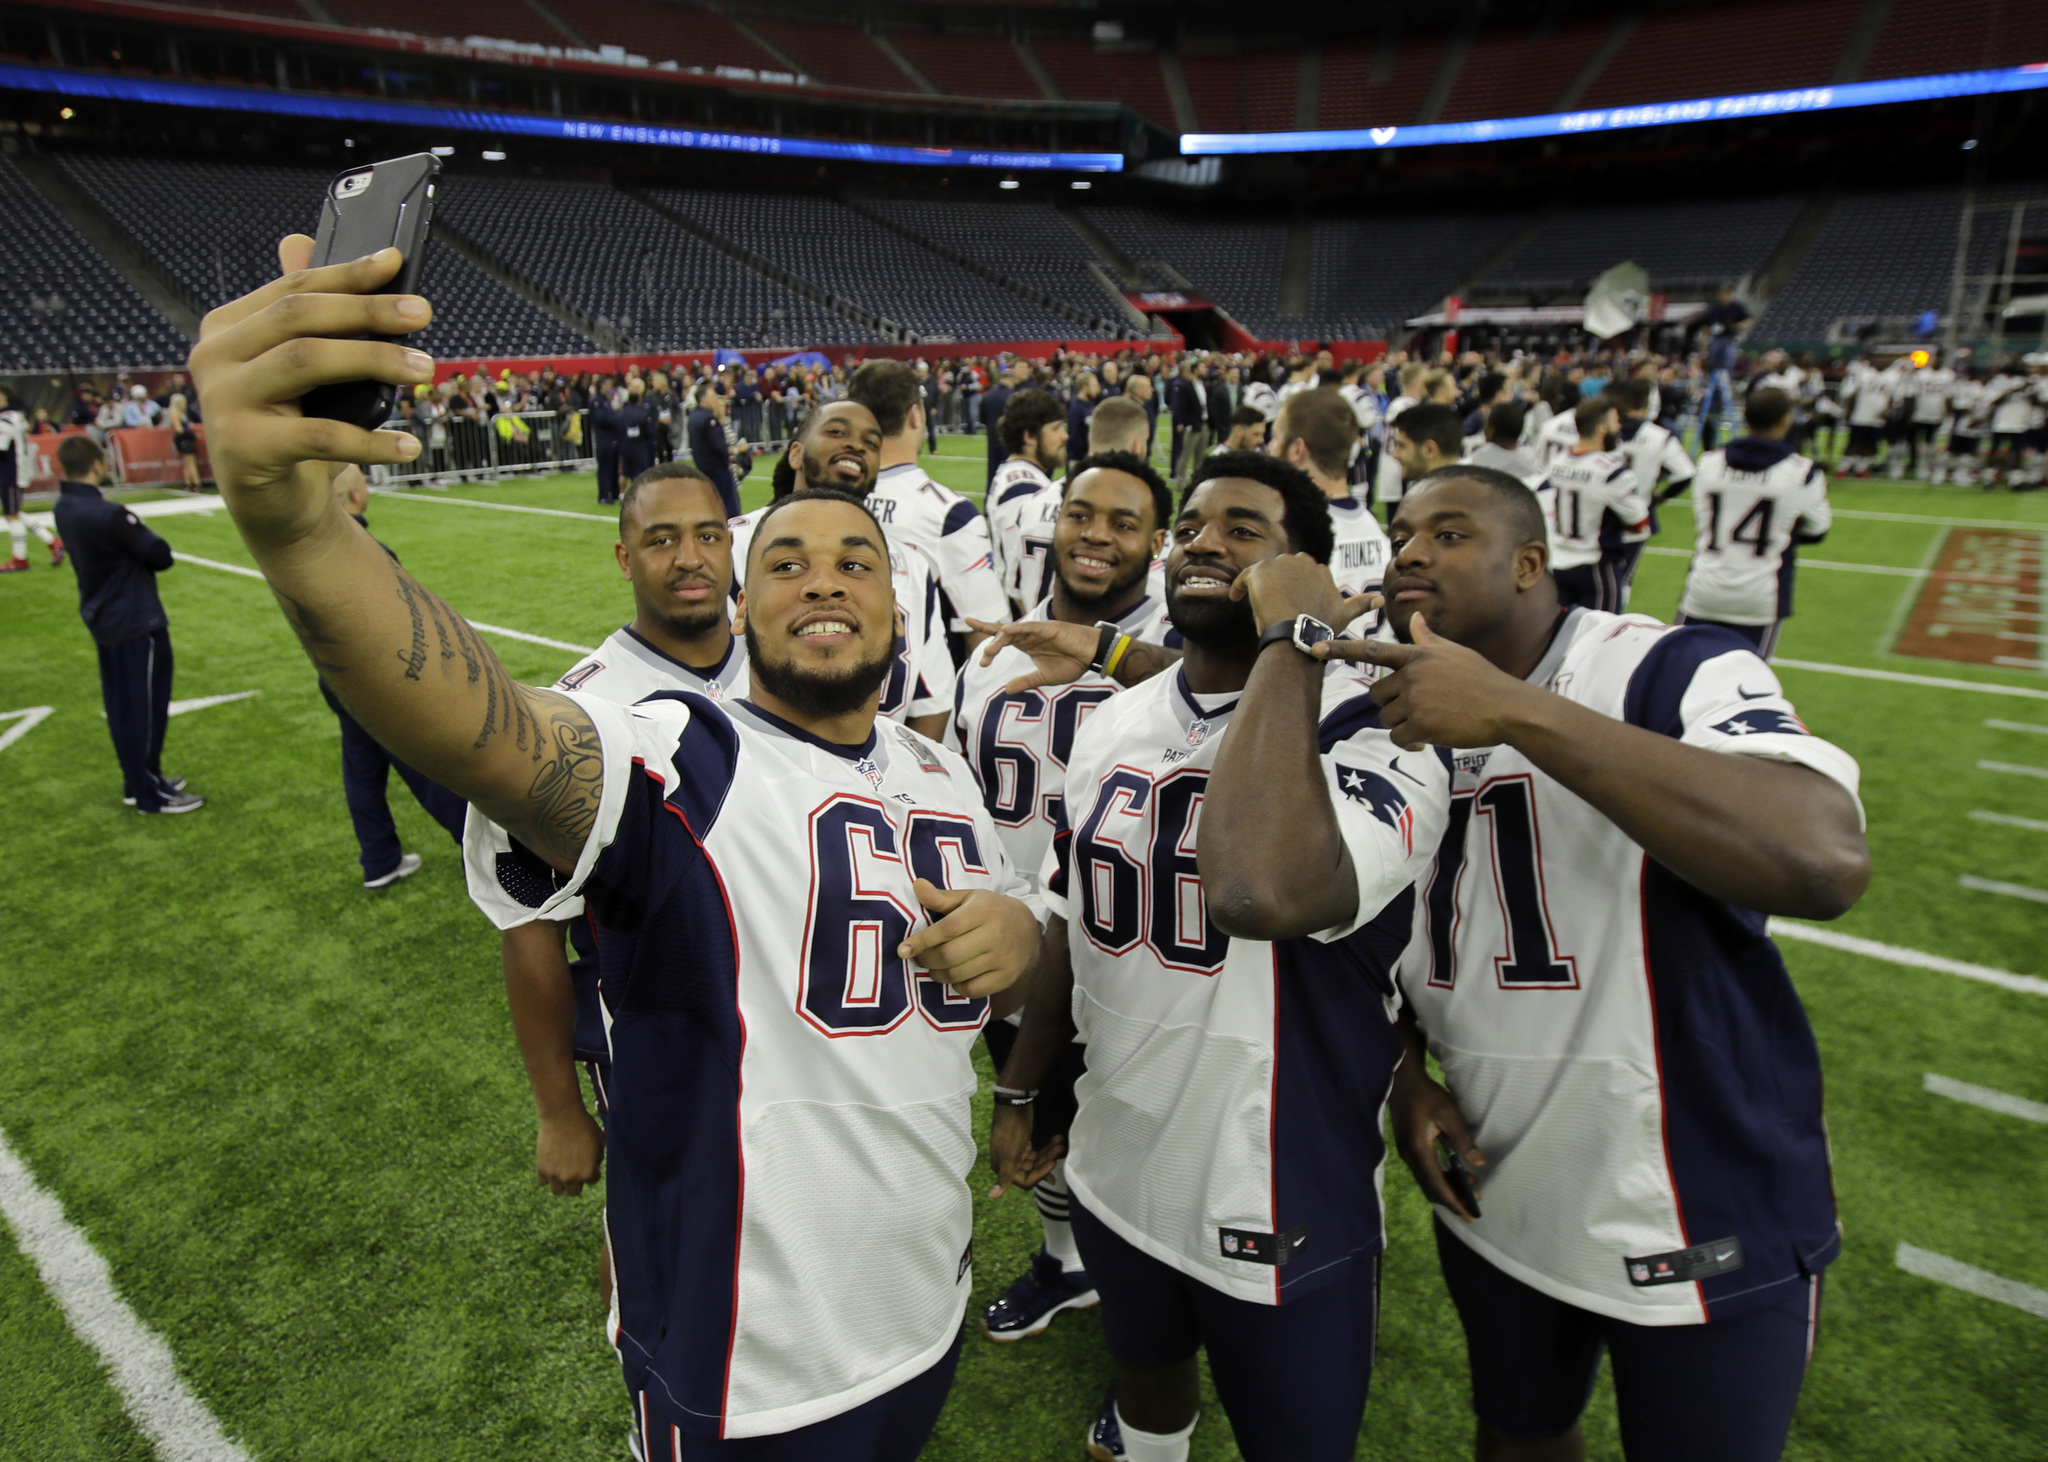 New England Patriots players take a selfie during a walk through at NRG Stadium, site of the NFL Super Bowl 51 football game Saturday in Houston. The Patriots will face the Atlanta Falcons in the Super Bowl Sunday. (AP Photo | Charlie Riedel)